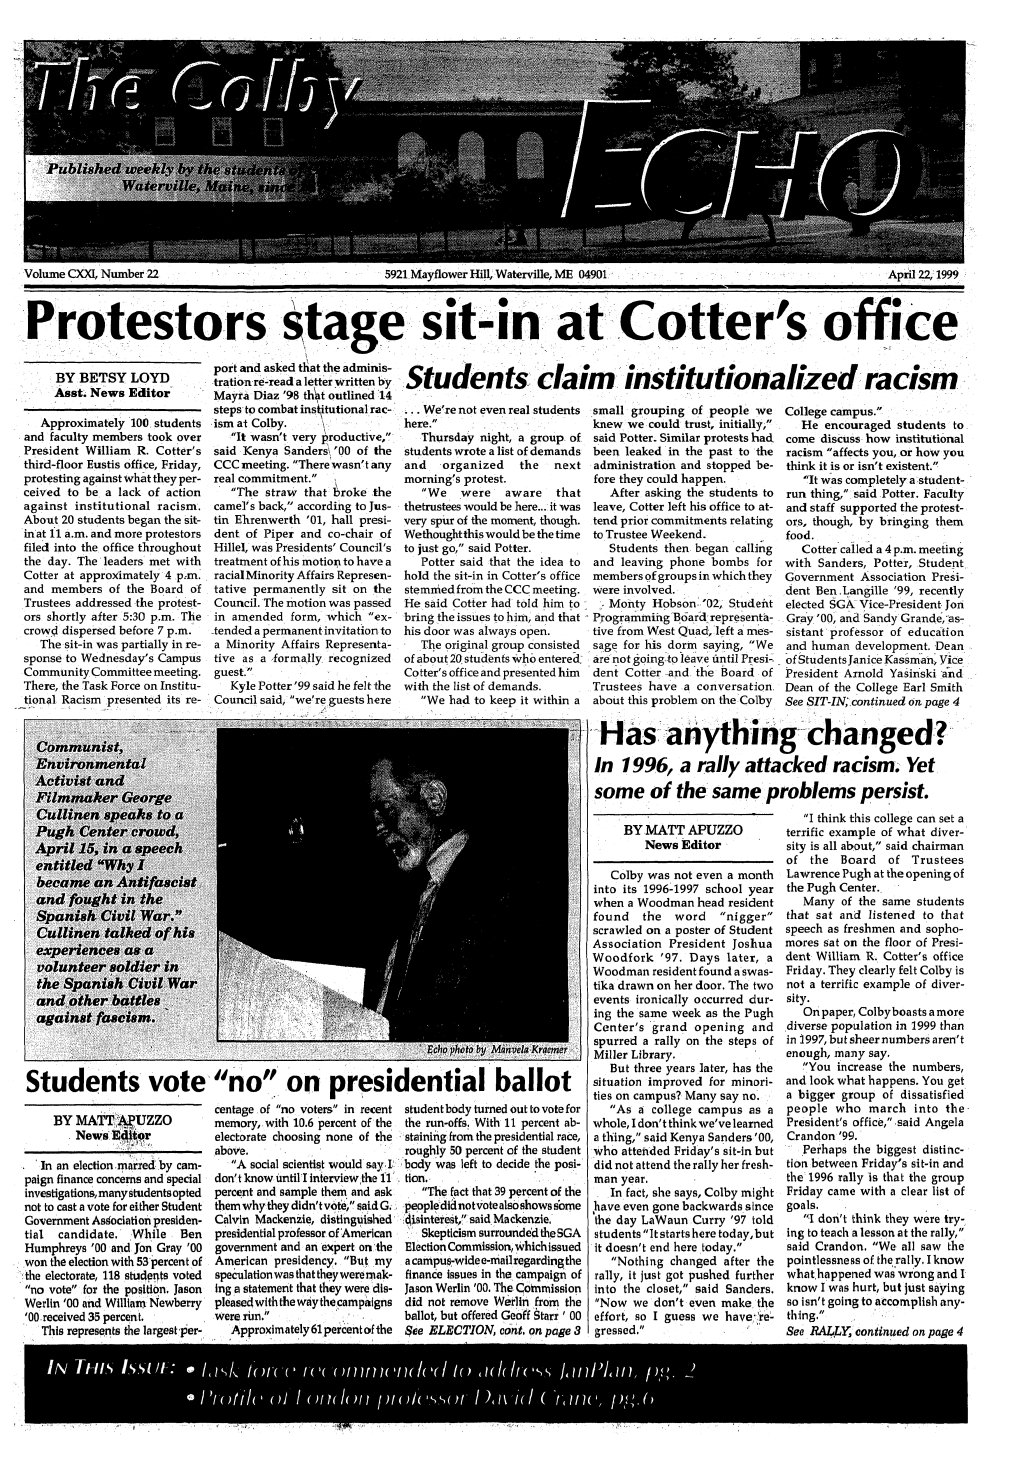 Protestors Stace Sit-In at Cotte R's Office